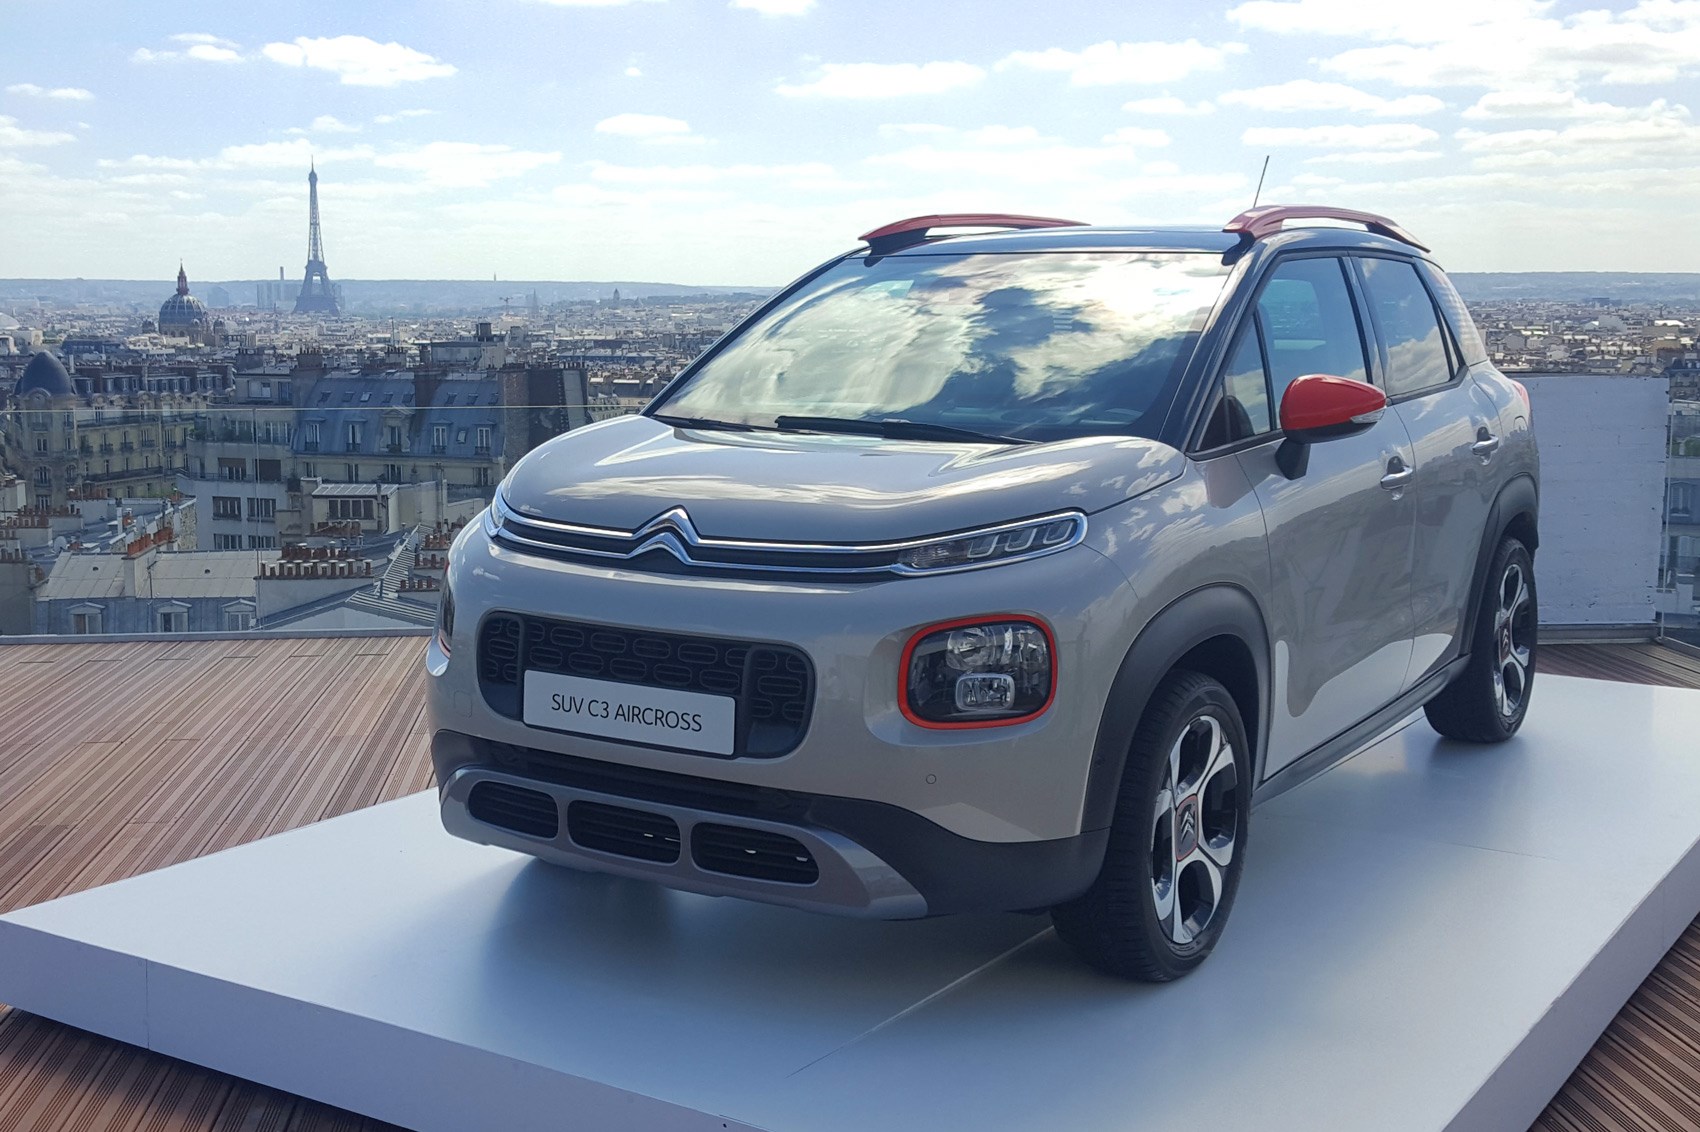 Citroen C3 Aircross: pictures, specs and info